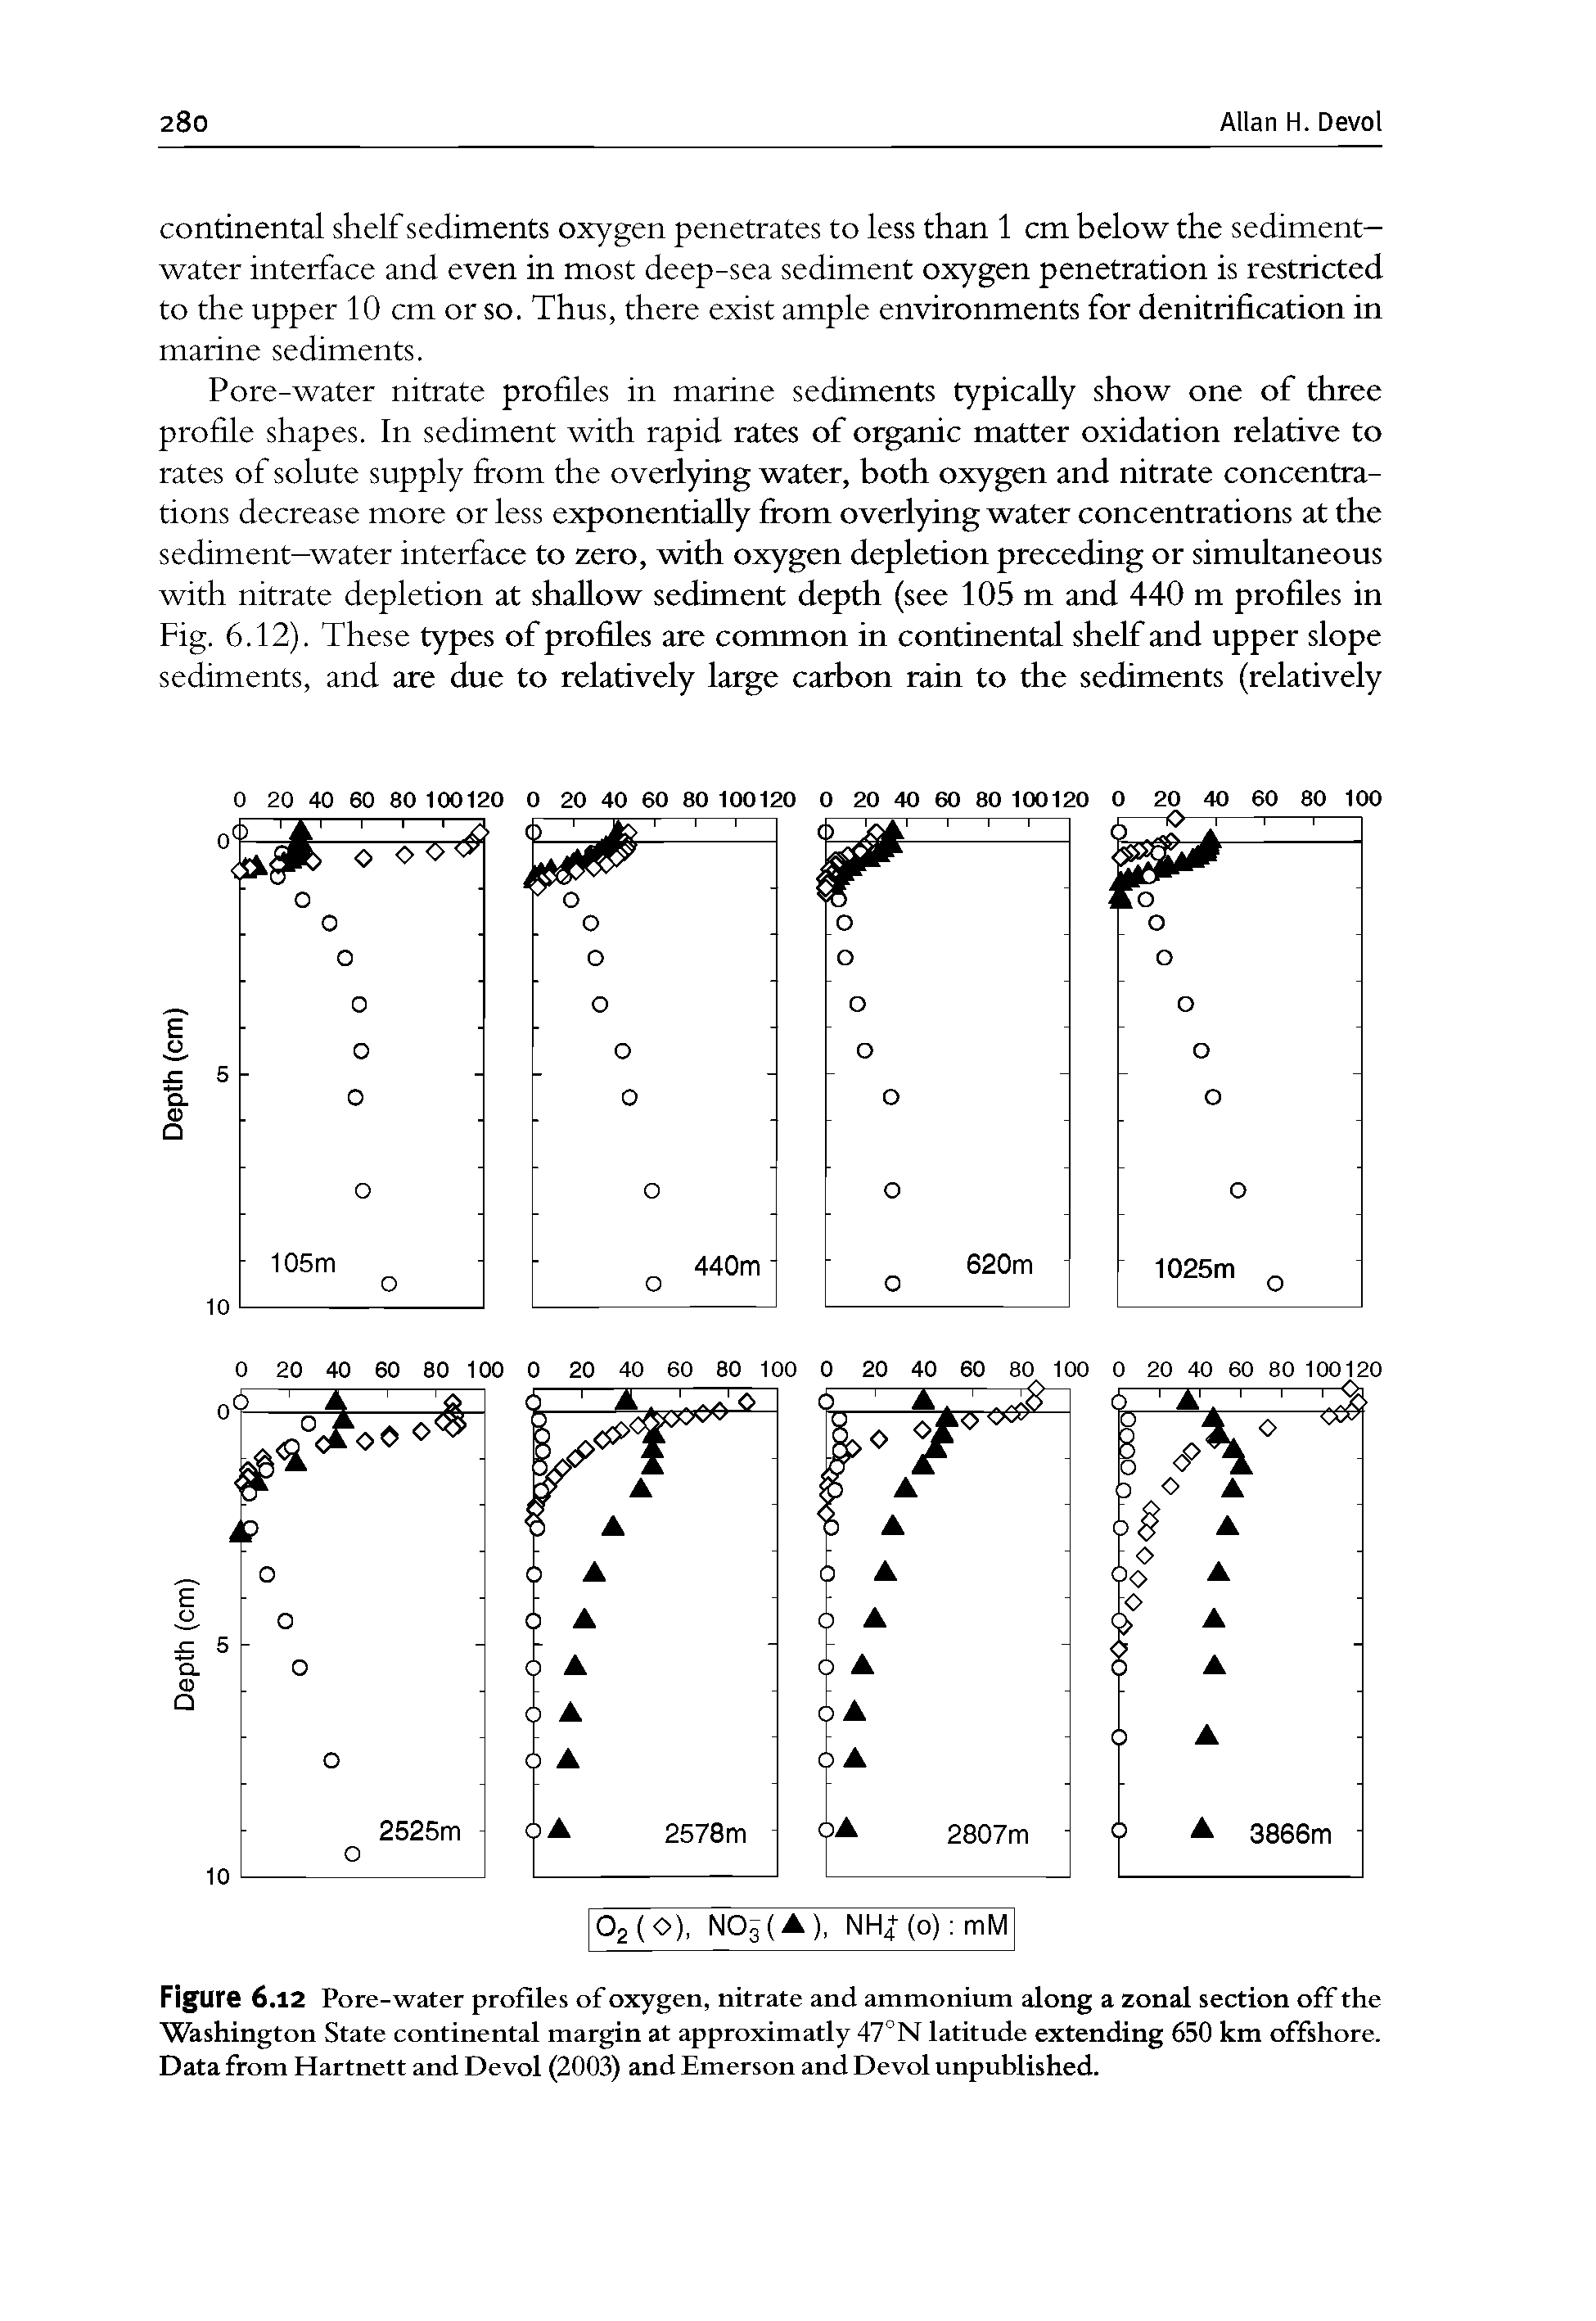 Figure 6.12 Pore-water profiles of oxygen, nitrate and ammonium along a zonal section off the Washington State continental margin at approximatly 47°N latitude extending 650 km offshore. Data from Hartnett and Devol (2003) and Emerson and Devol unpublished.